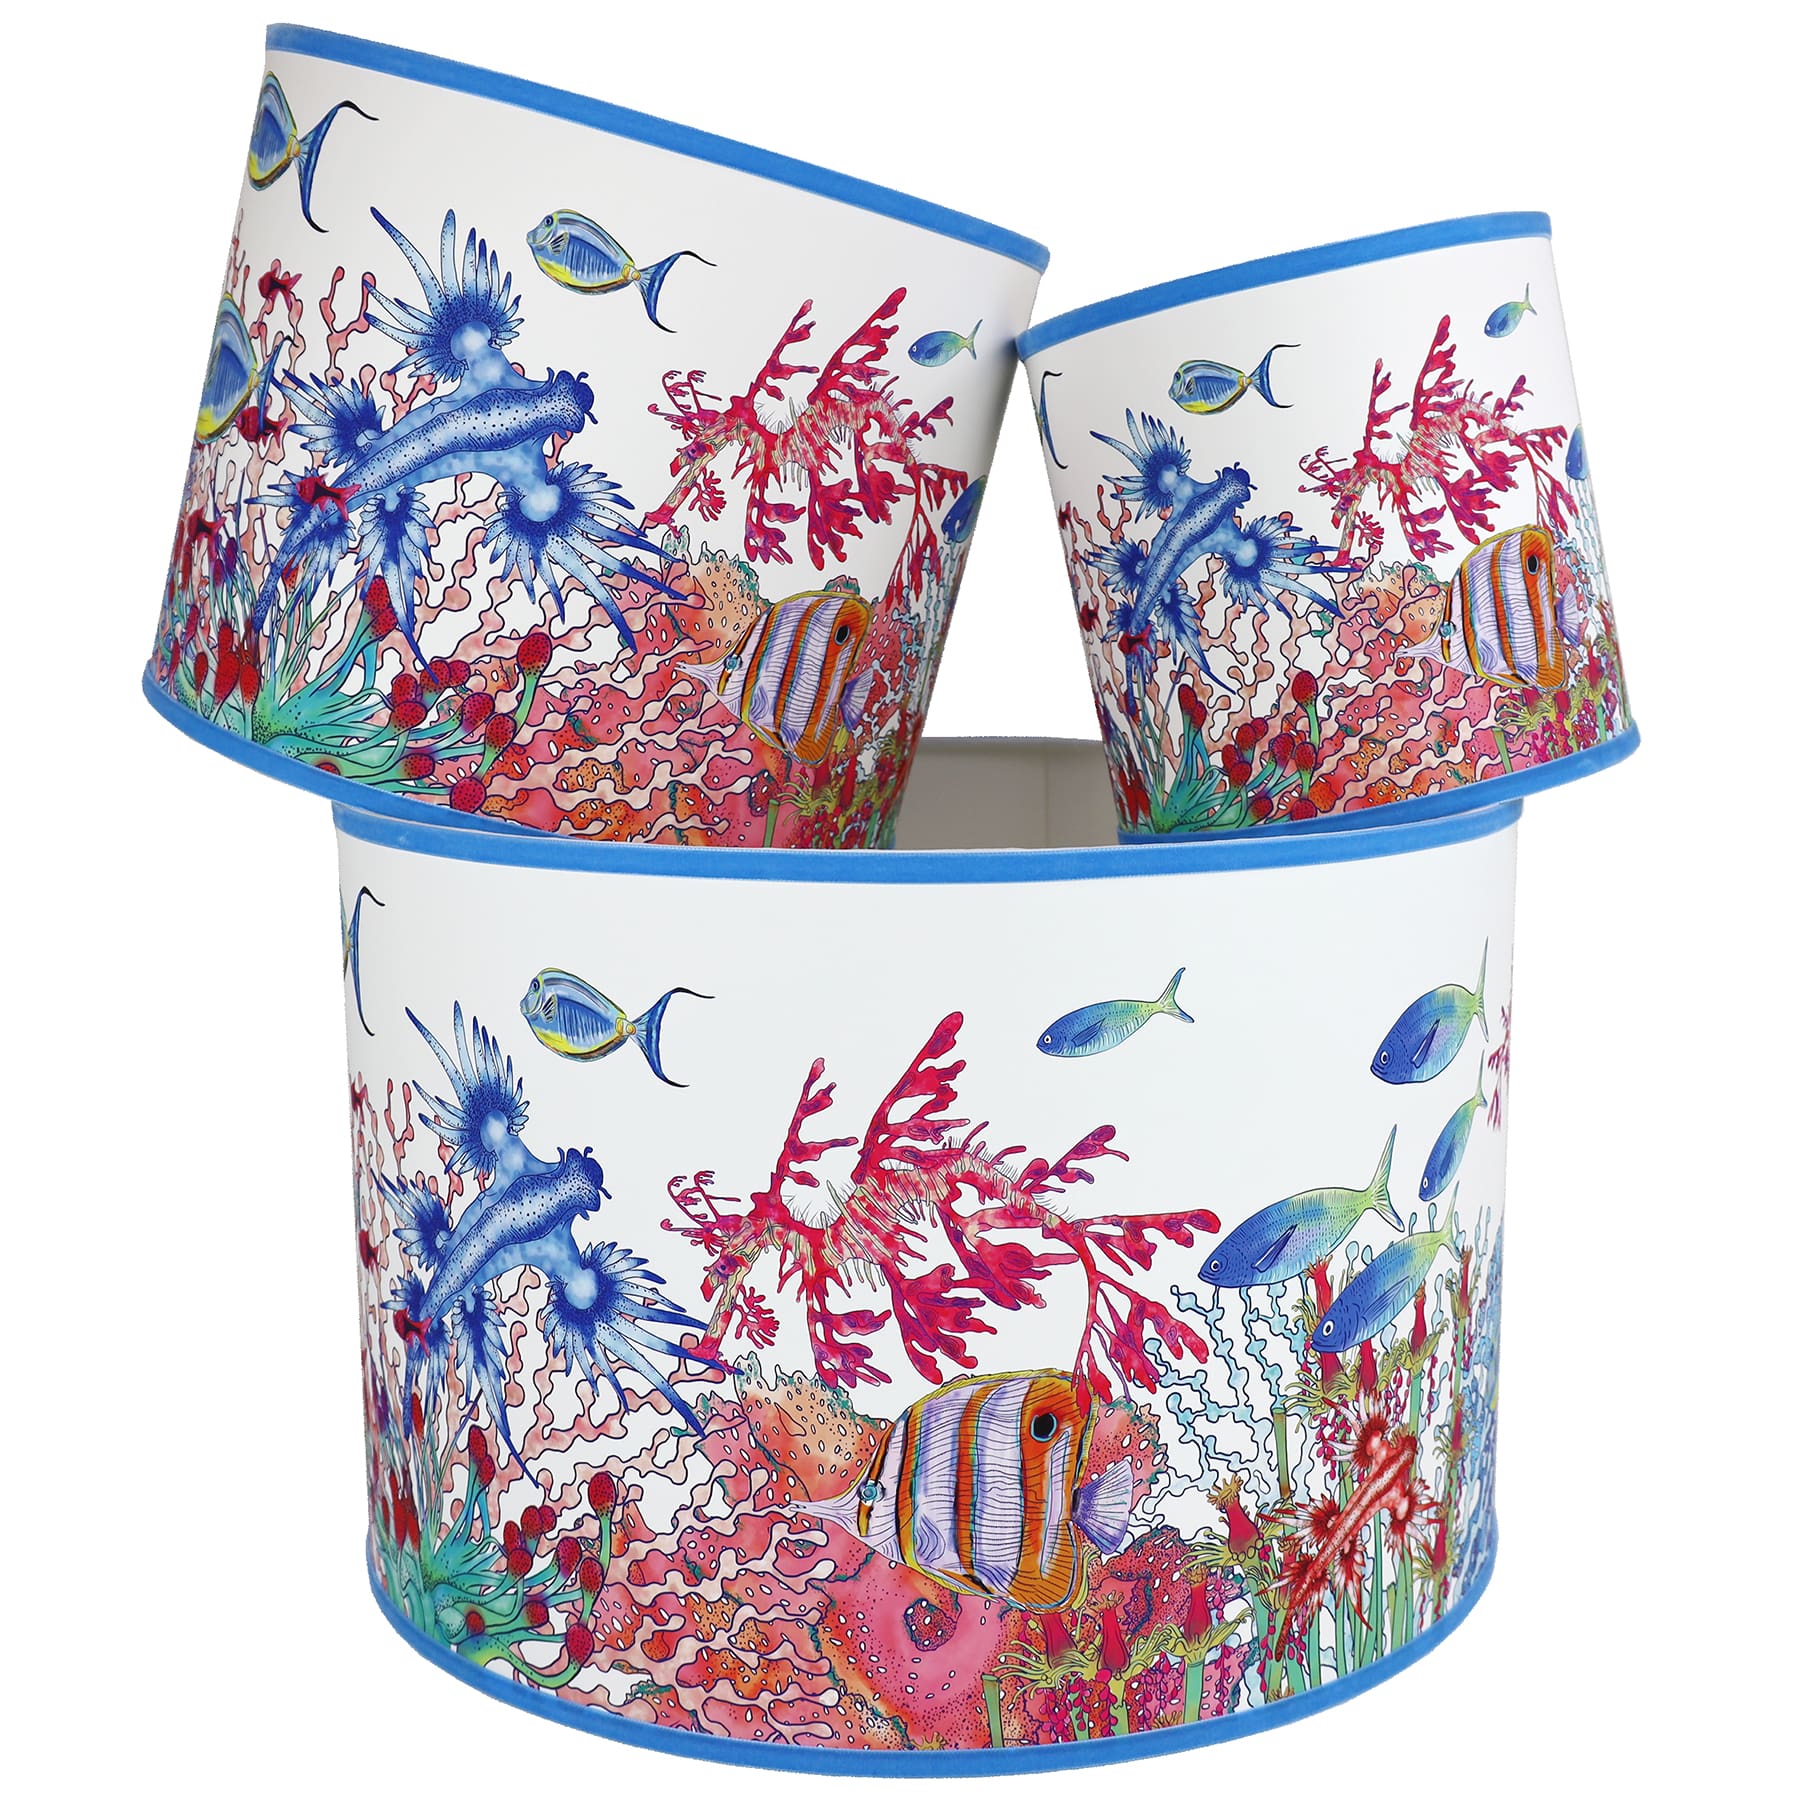 Coral Bay design lampshades in White with blue trim,with various brightly coloured fish swimming amongst the seaweed.The lampshades are shown in a stack of three showing all three sizes.